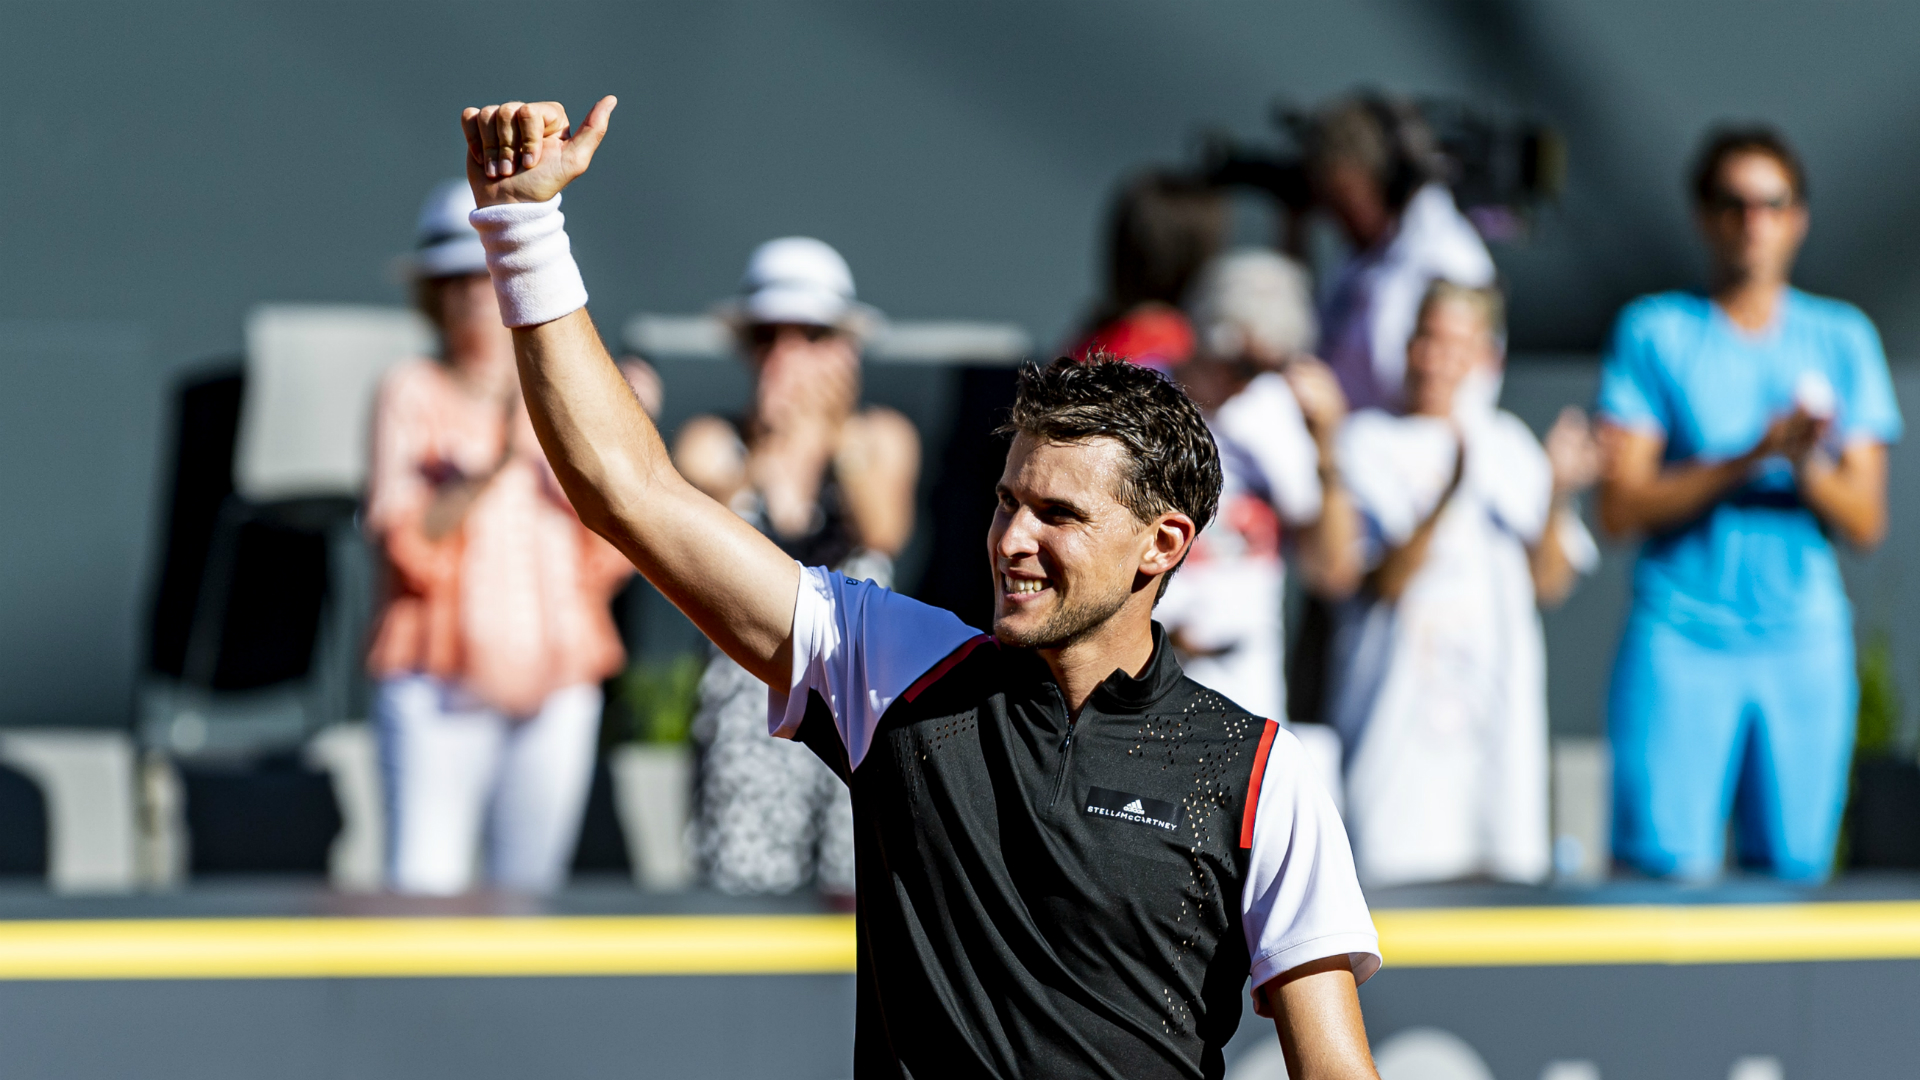 Dominic Thiem is the star attraction in Hamburg this week and reached the European Masters last eight with a polished performance.